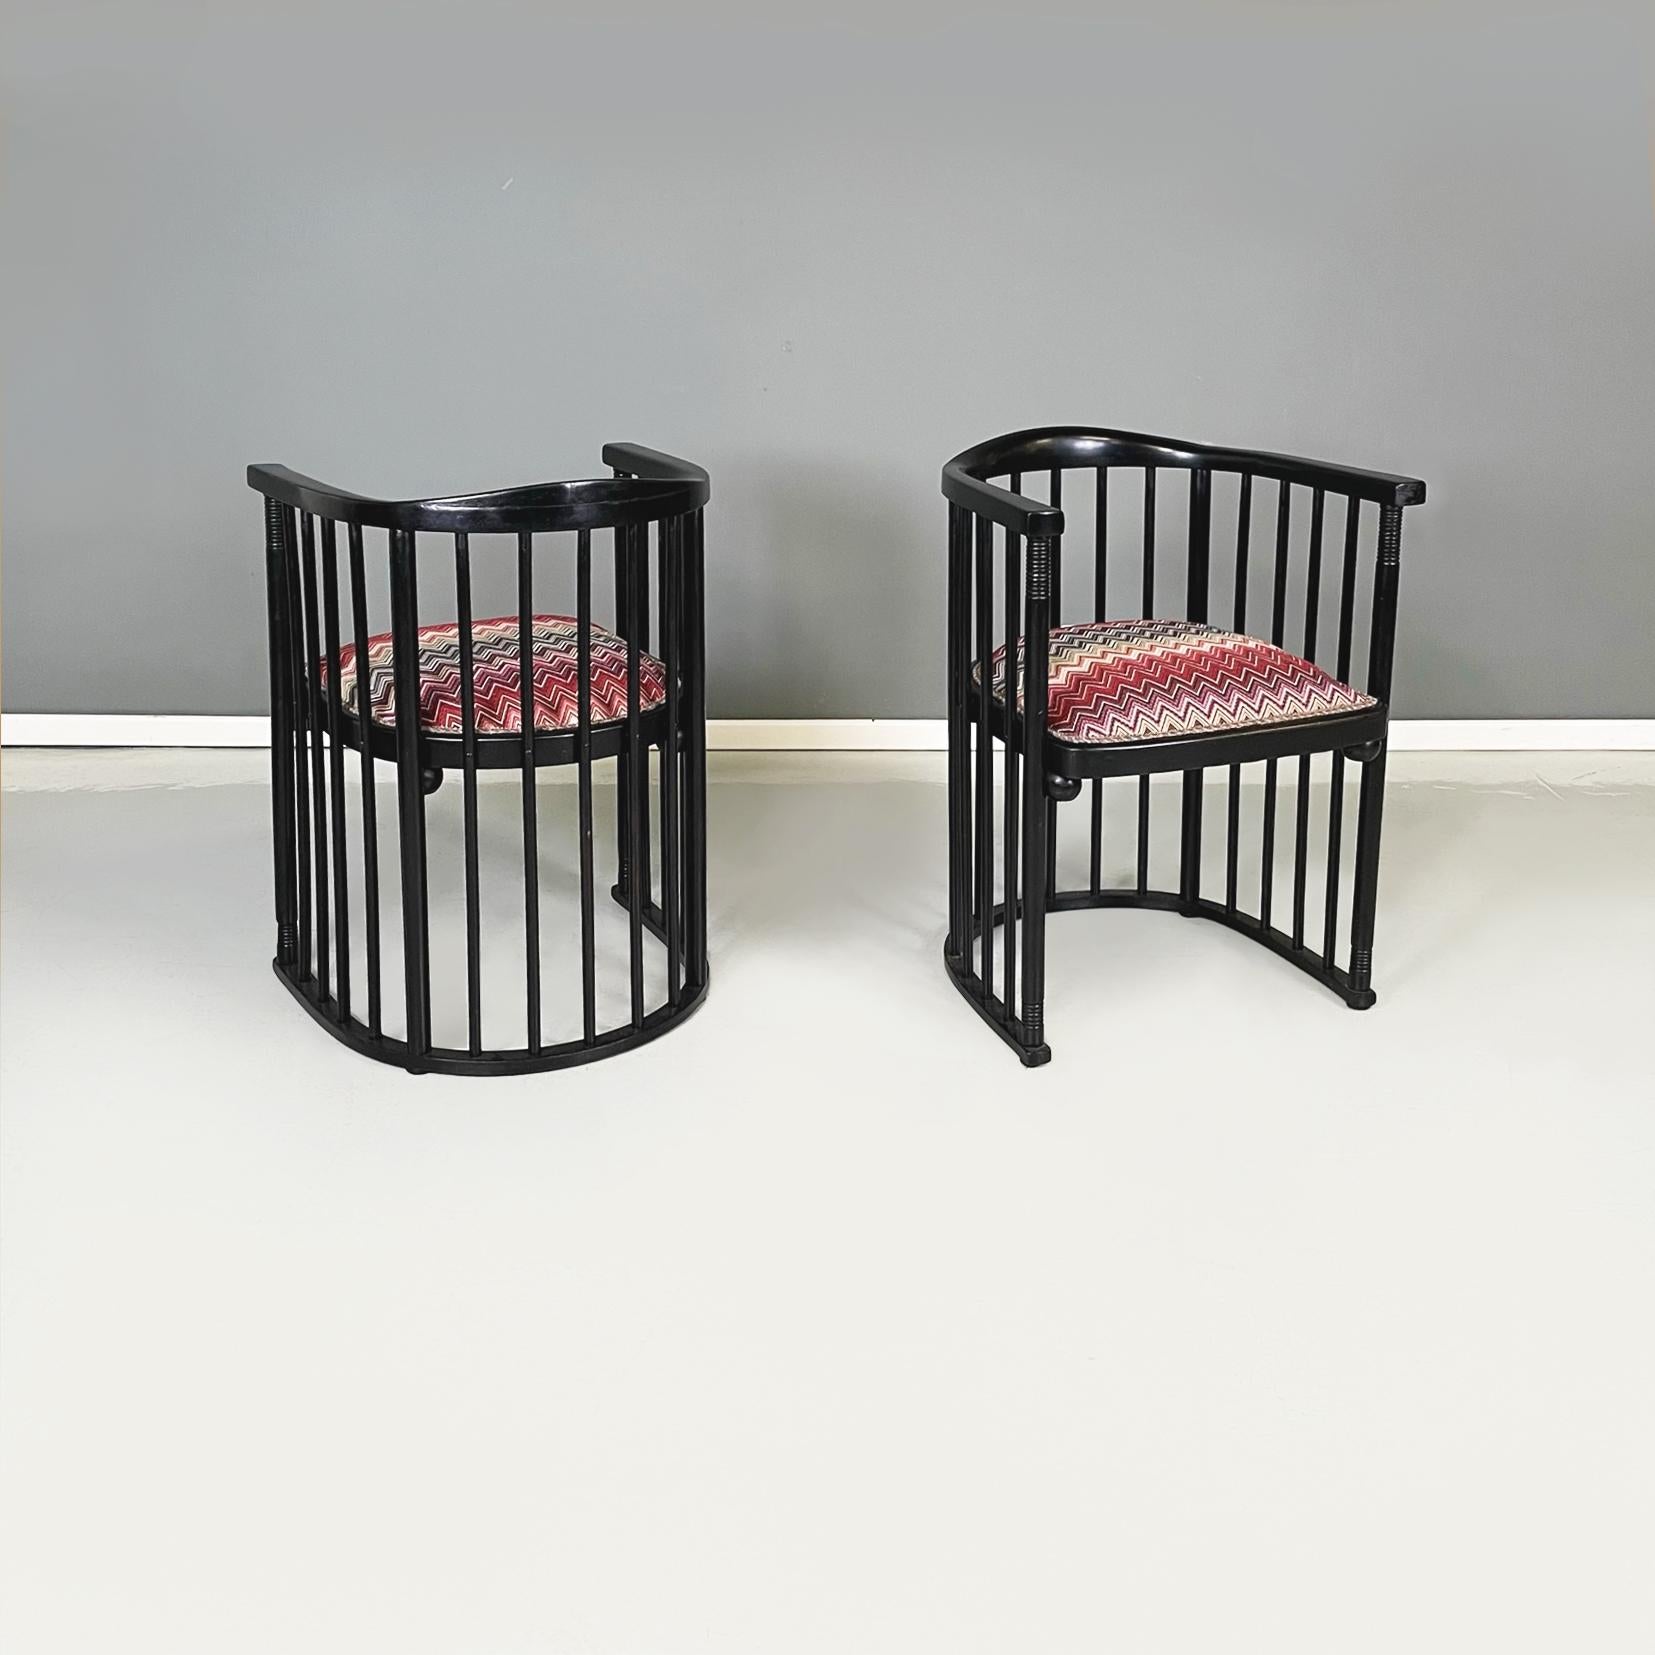 Austrian mid-century Missoni fabric black wood Tub chairs by Joseph Hoffmann, 1950s
Pair of tub chairs with semi-round padded seat upholstered in Missoni fabric. The seat is upholstered in a colored zig zag patterned fabric. The structure is made up